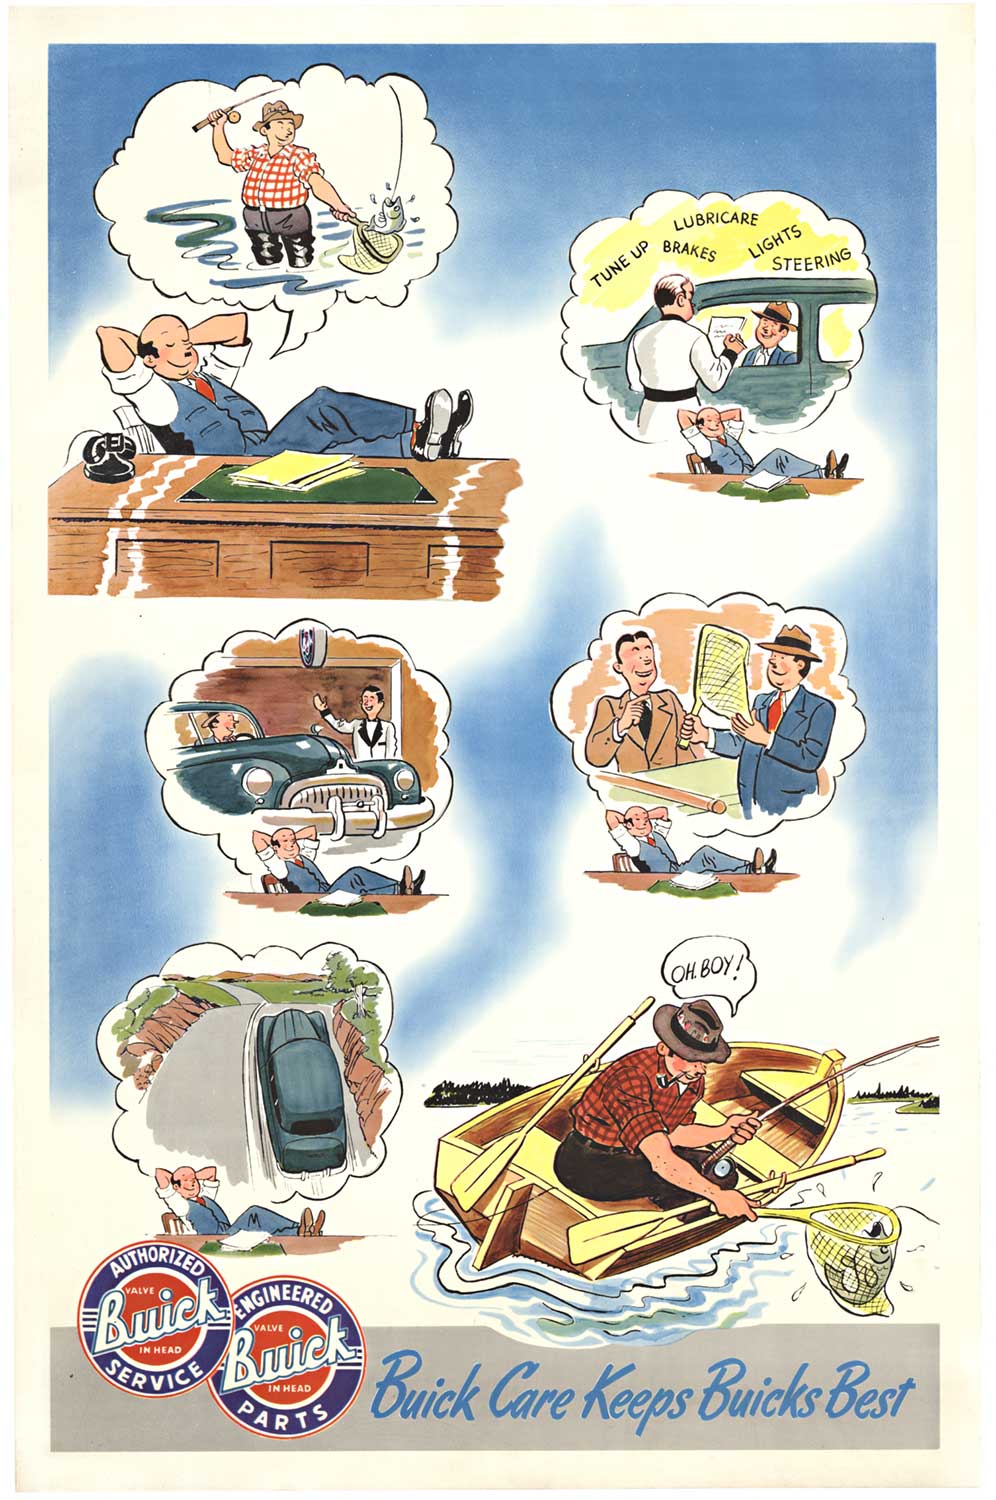  <br>Original “Buick Care Keeps Buicks Best” 1940s vintage automobile poster. Conservation linen backed in excellent condition, ready to frame. Lithograph without an artist indicated. <br> <br>The poster features a Buick owner sitting at his desk